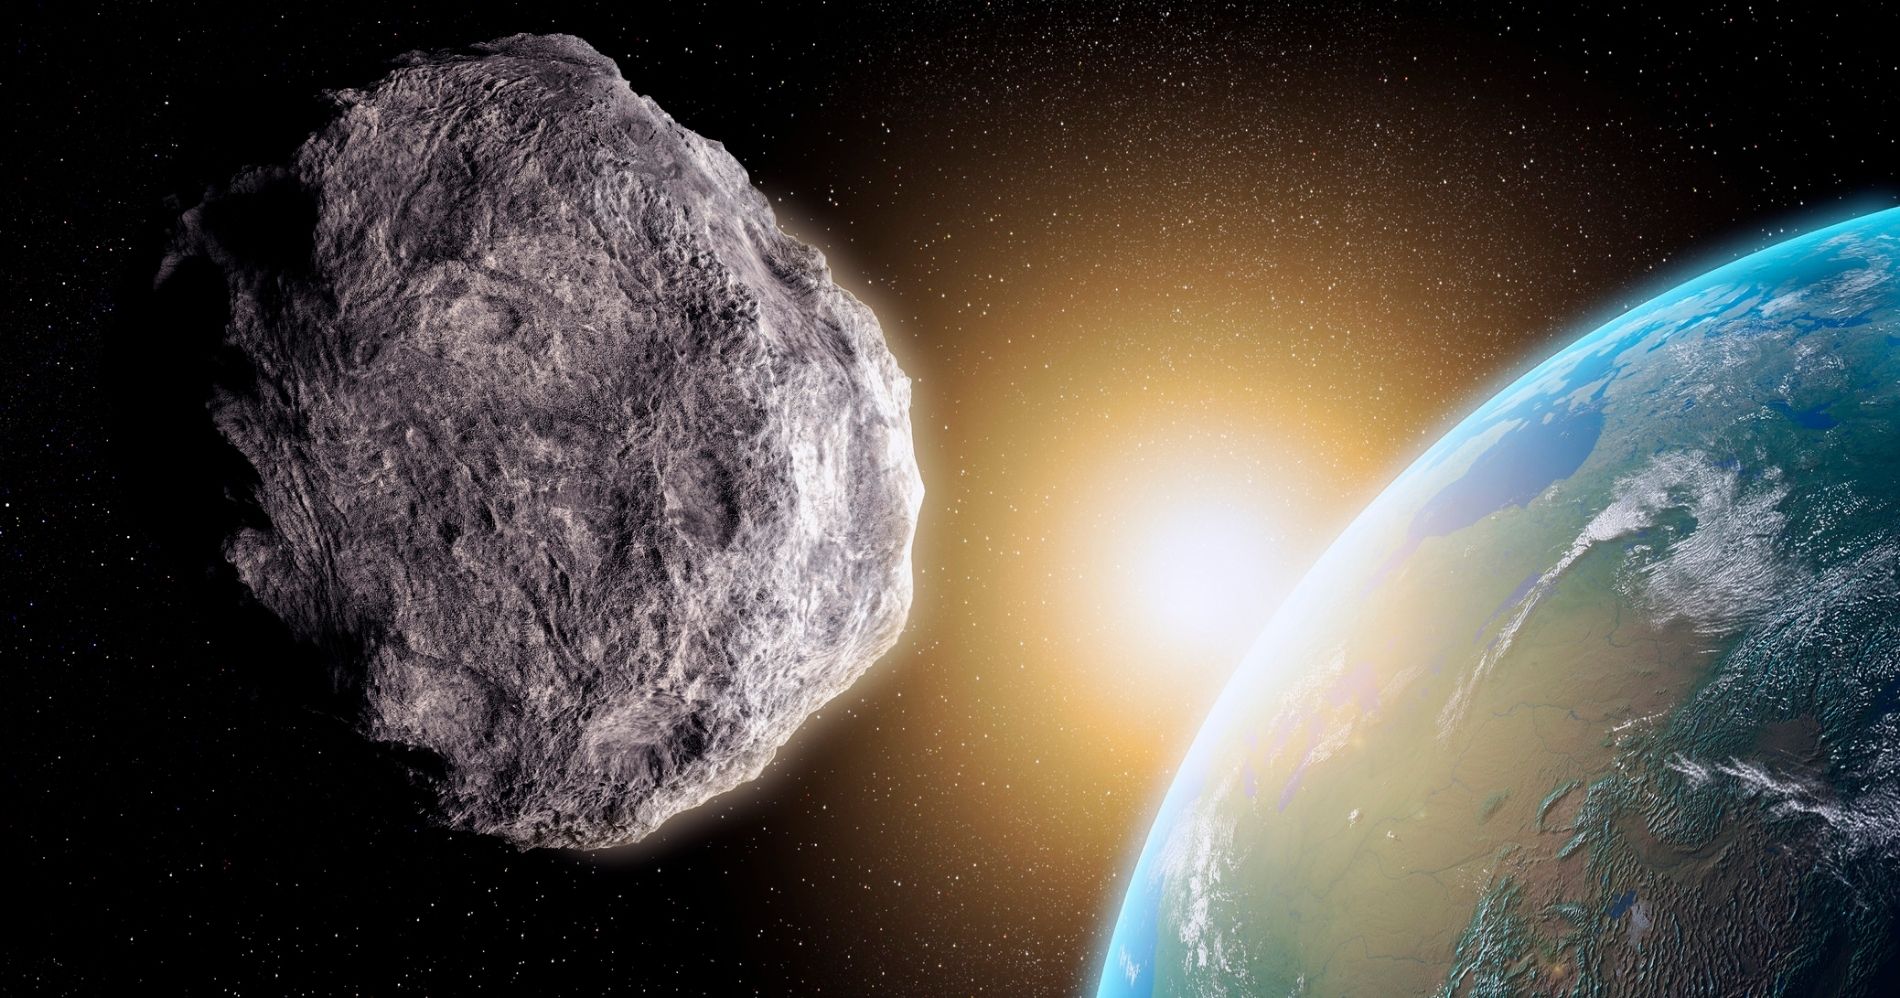 Asteroid and Earth Illustration Web Bisnis Muda - Canva